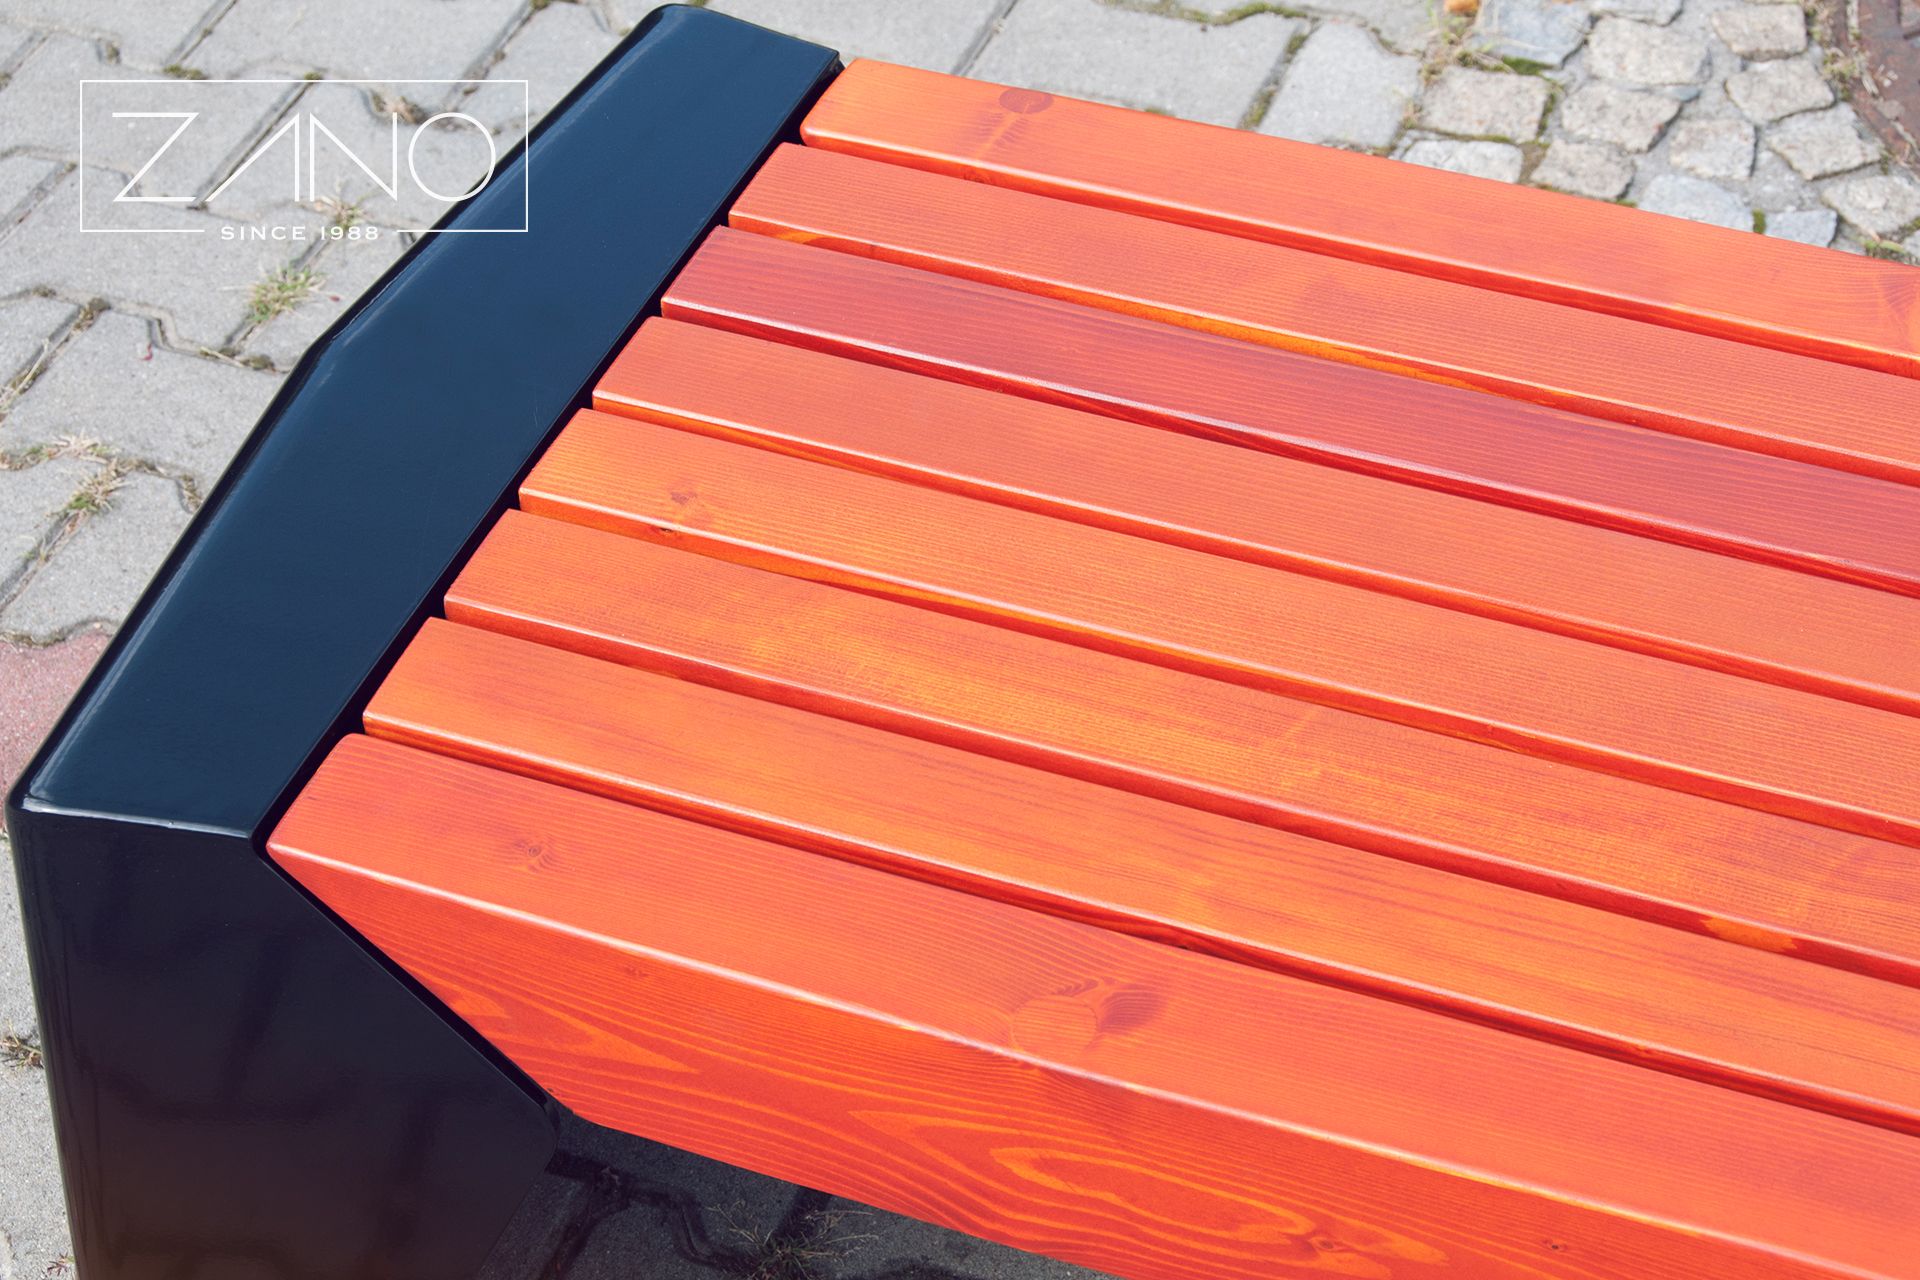 Steel urban bench with wooden seat